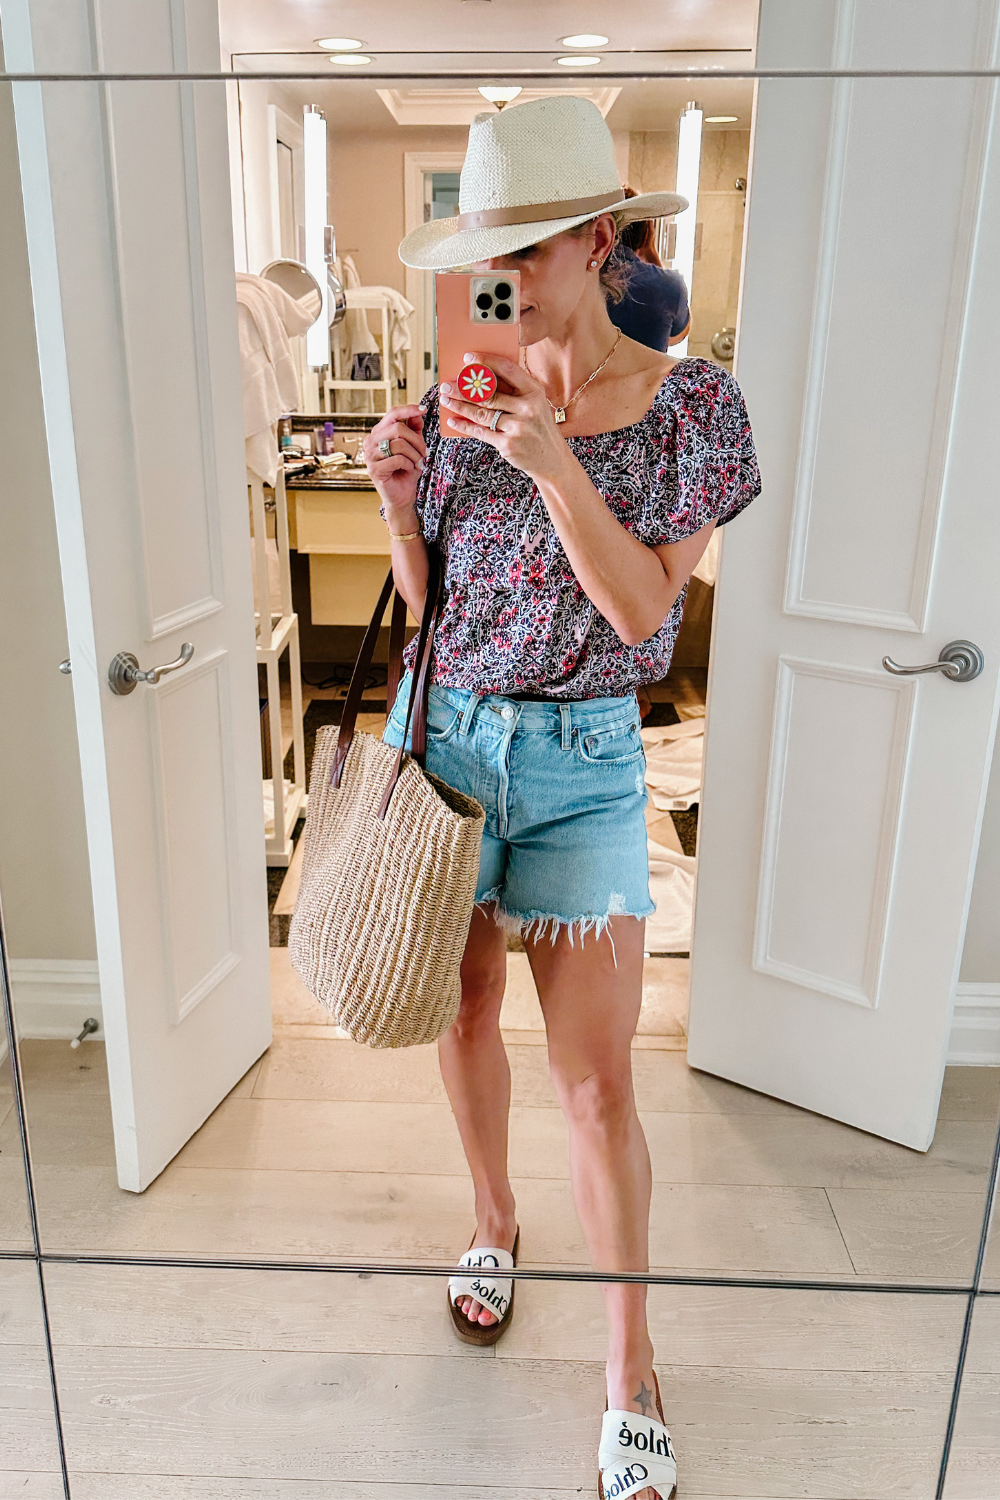 Suzanne wearing a floral top and denim shorts